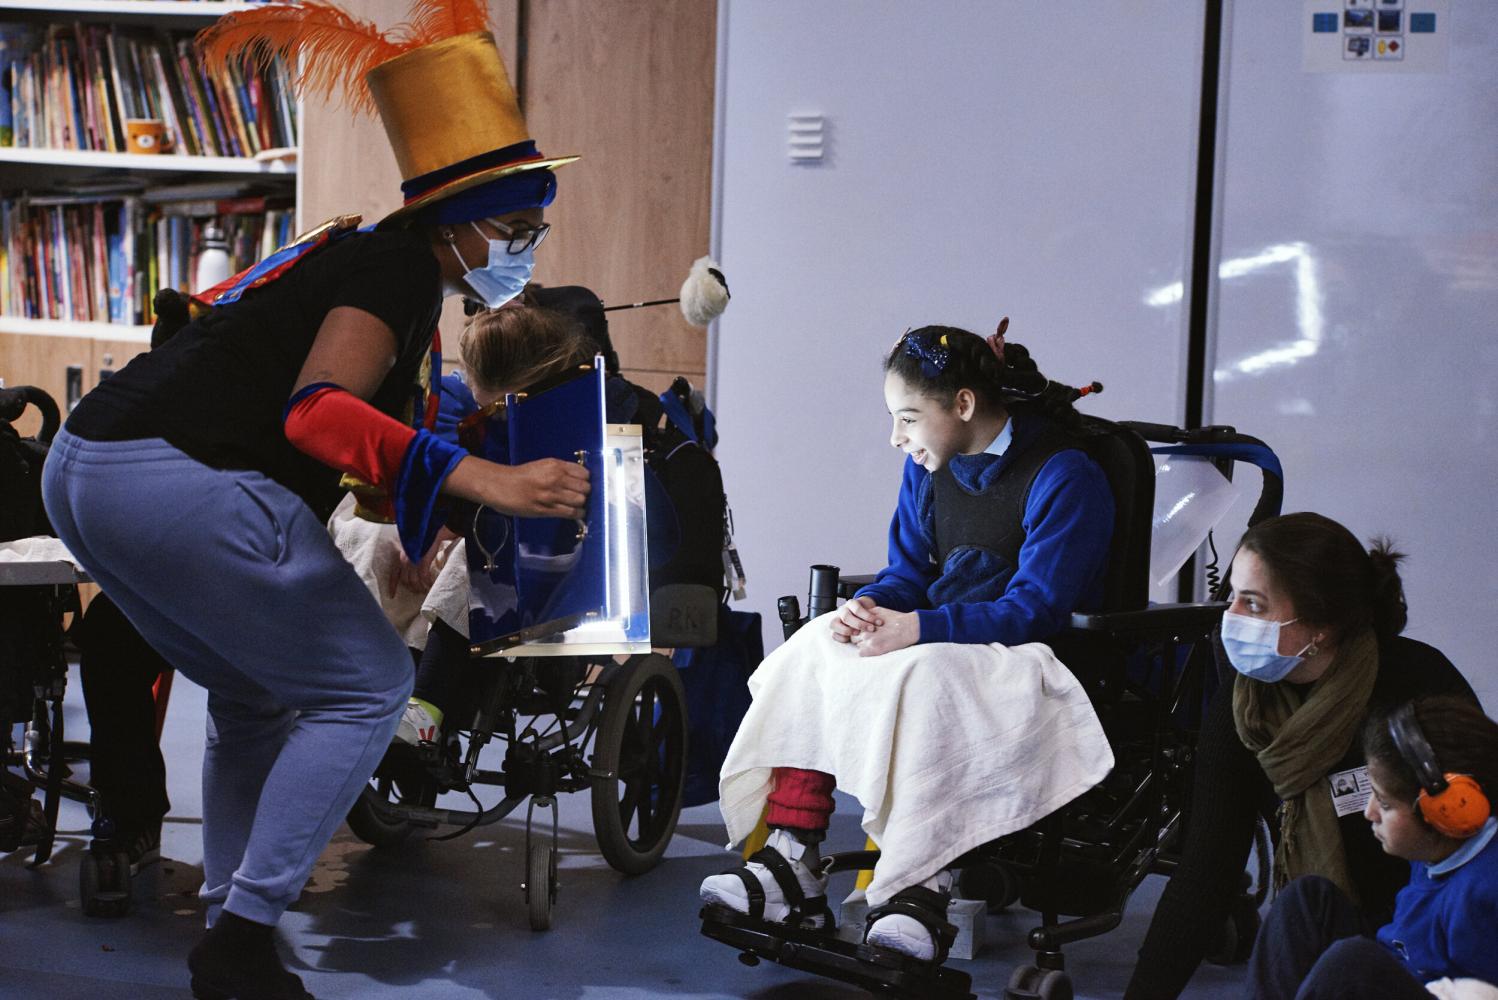 Young person in a wheelchair smiles at their reflection as their supporting adult holds up a mirror